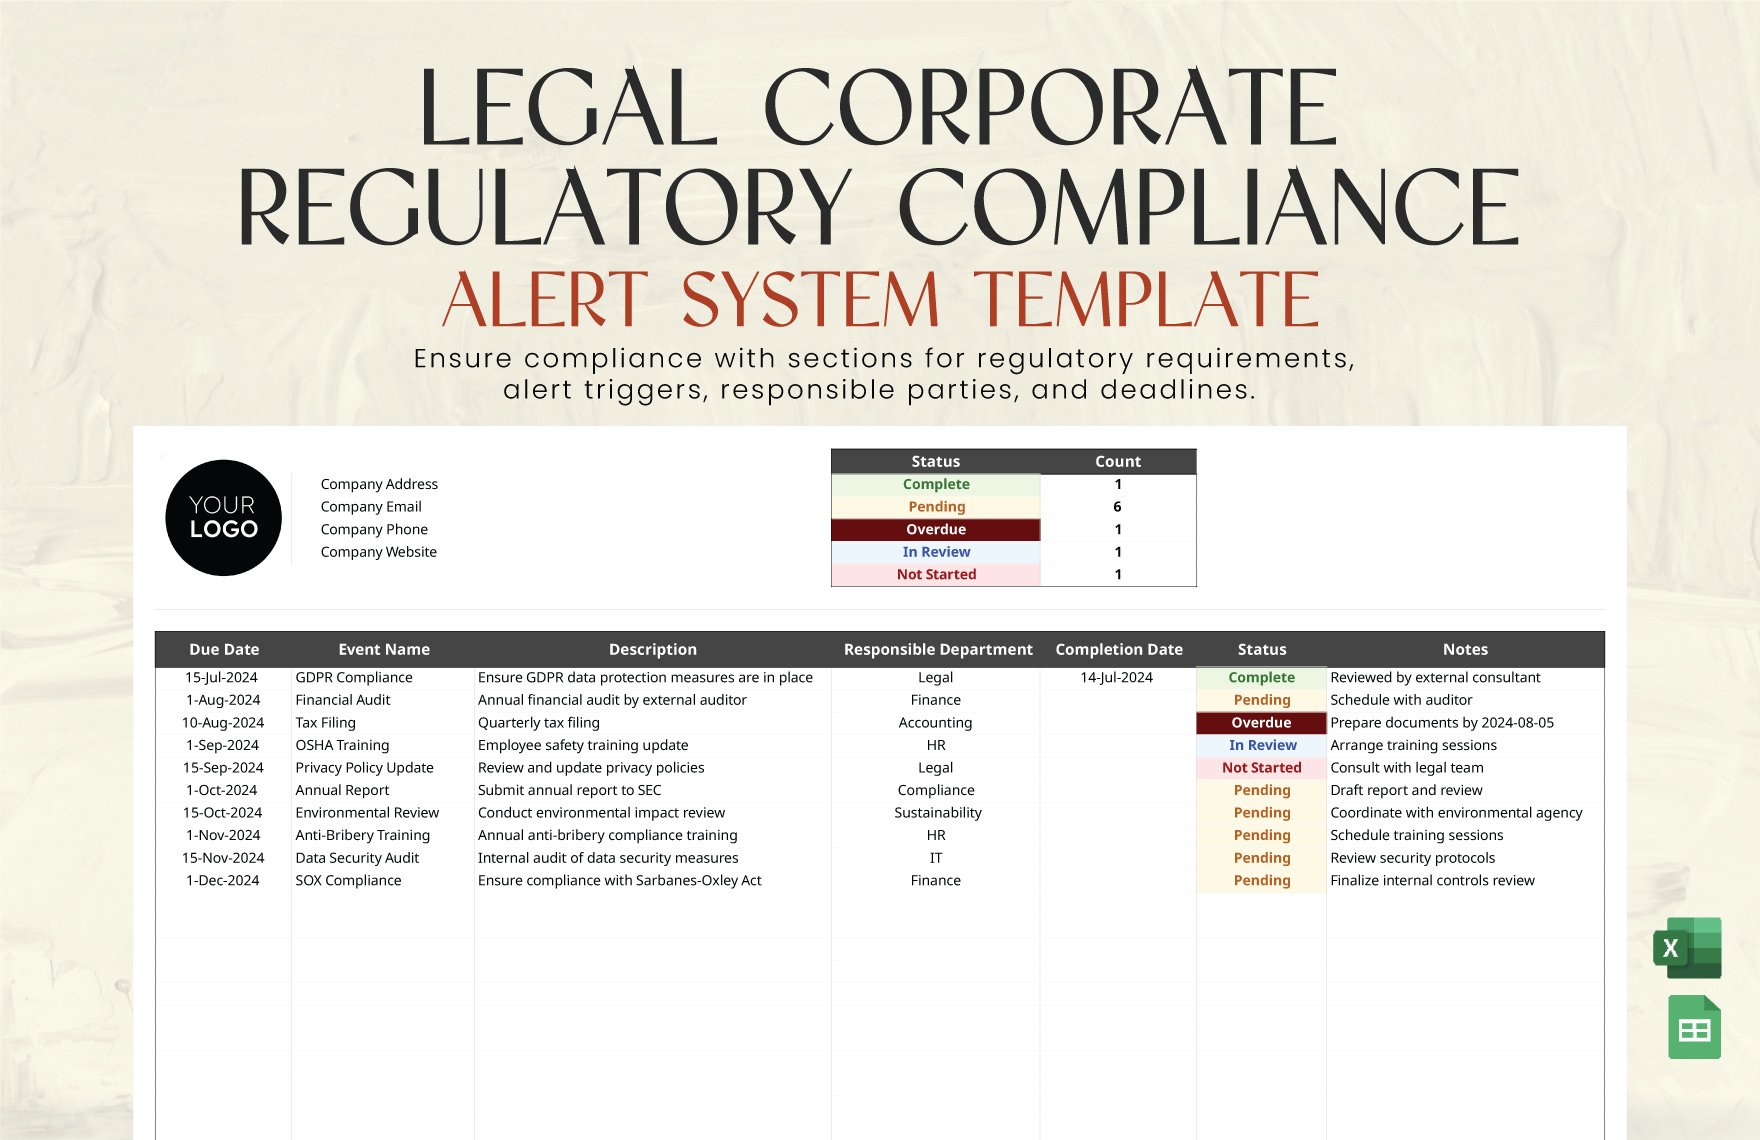 Legal Corporate Regulatory Compliance Alert System Template in Excel, Google Sheets